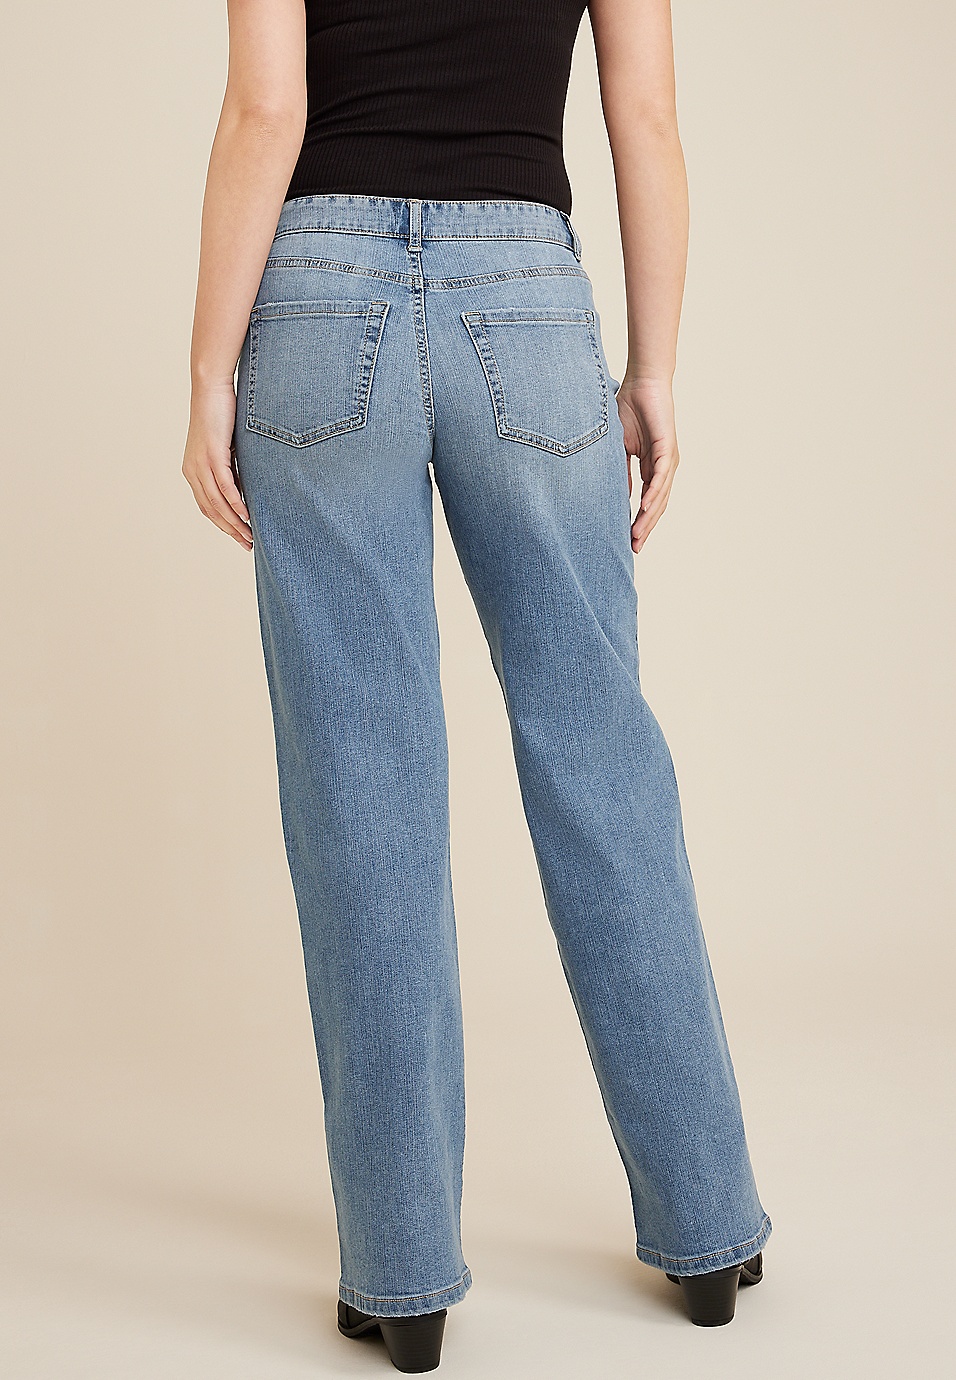 m jeans by maurices™ Classic Mid Rise Wide Leg Jean